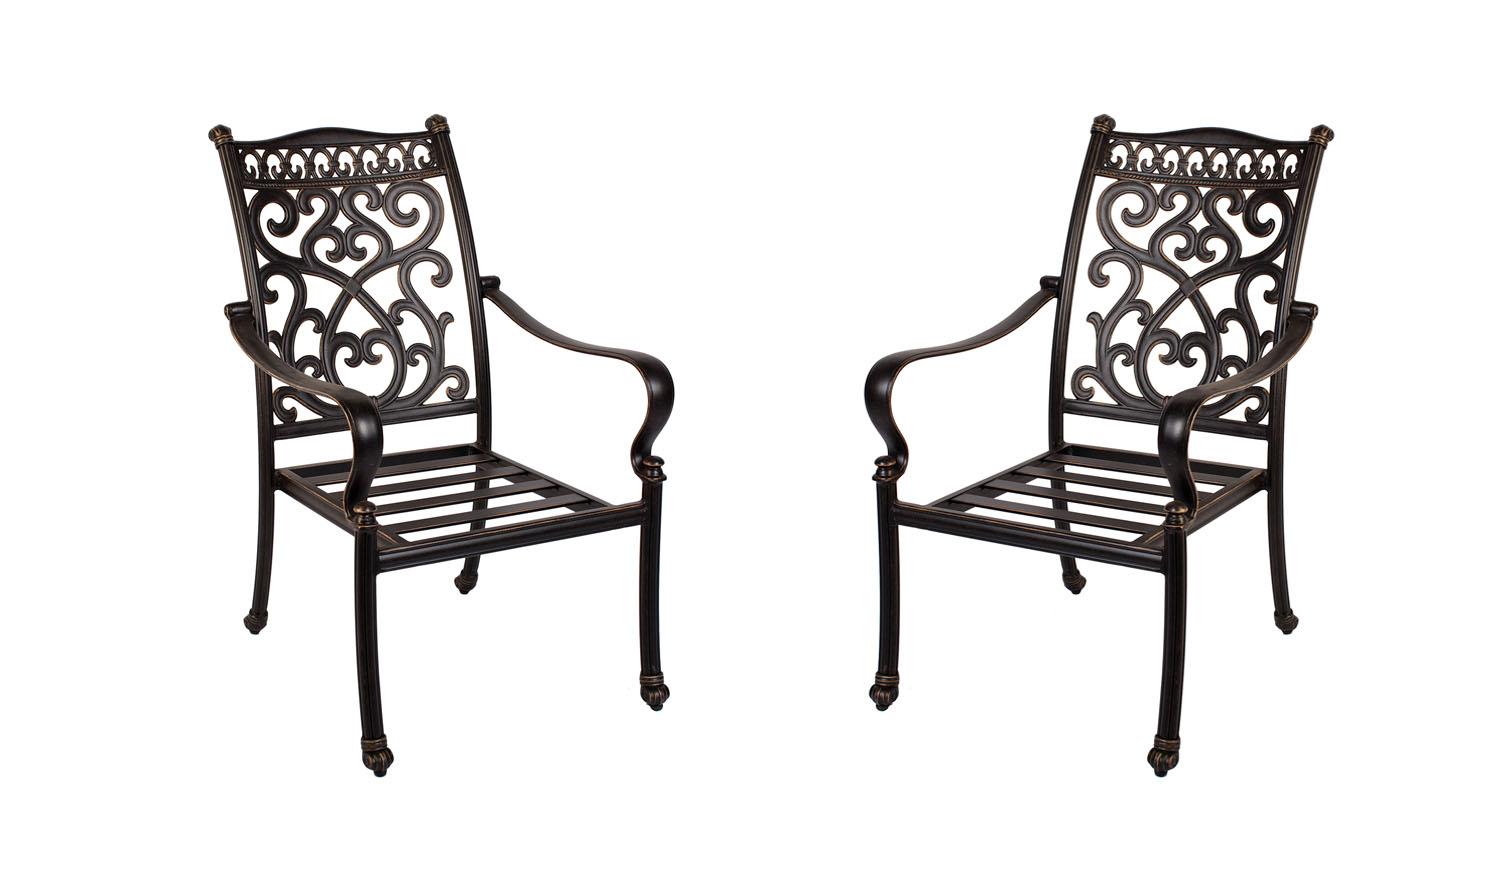 Contemporary Outdoor Dining Chair Alexis PCDC-Set-4 in Natural, Bronze Fabric